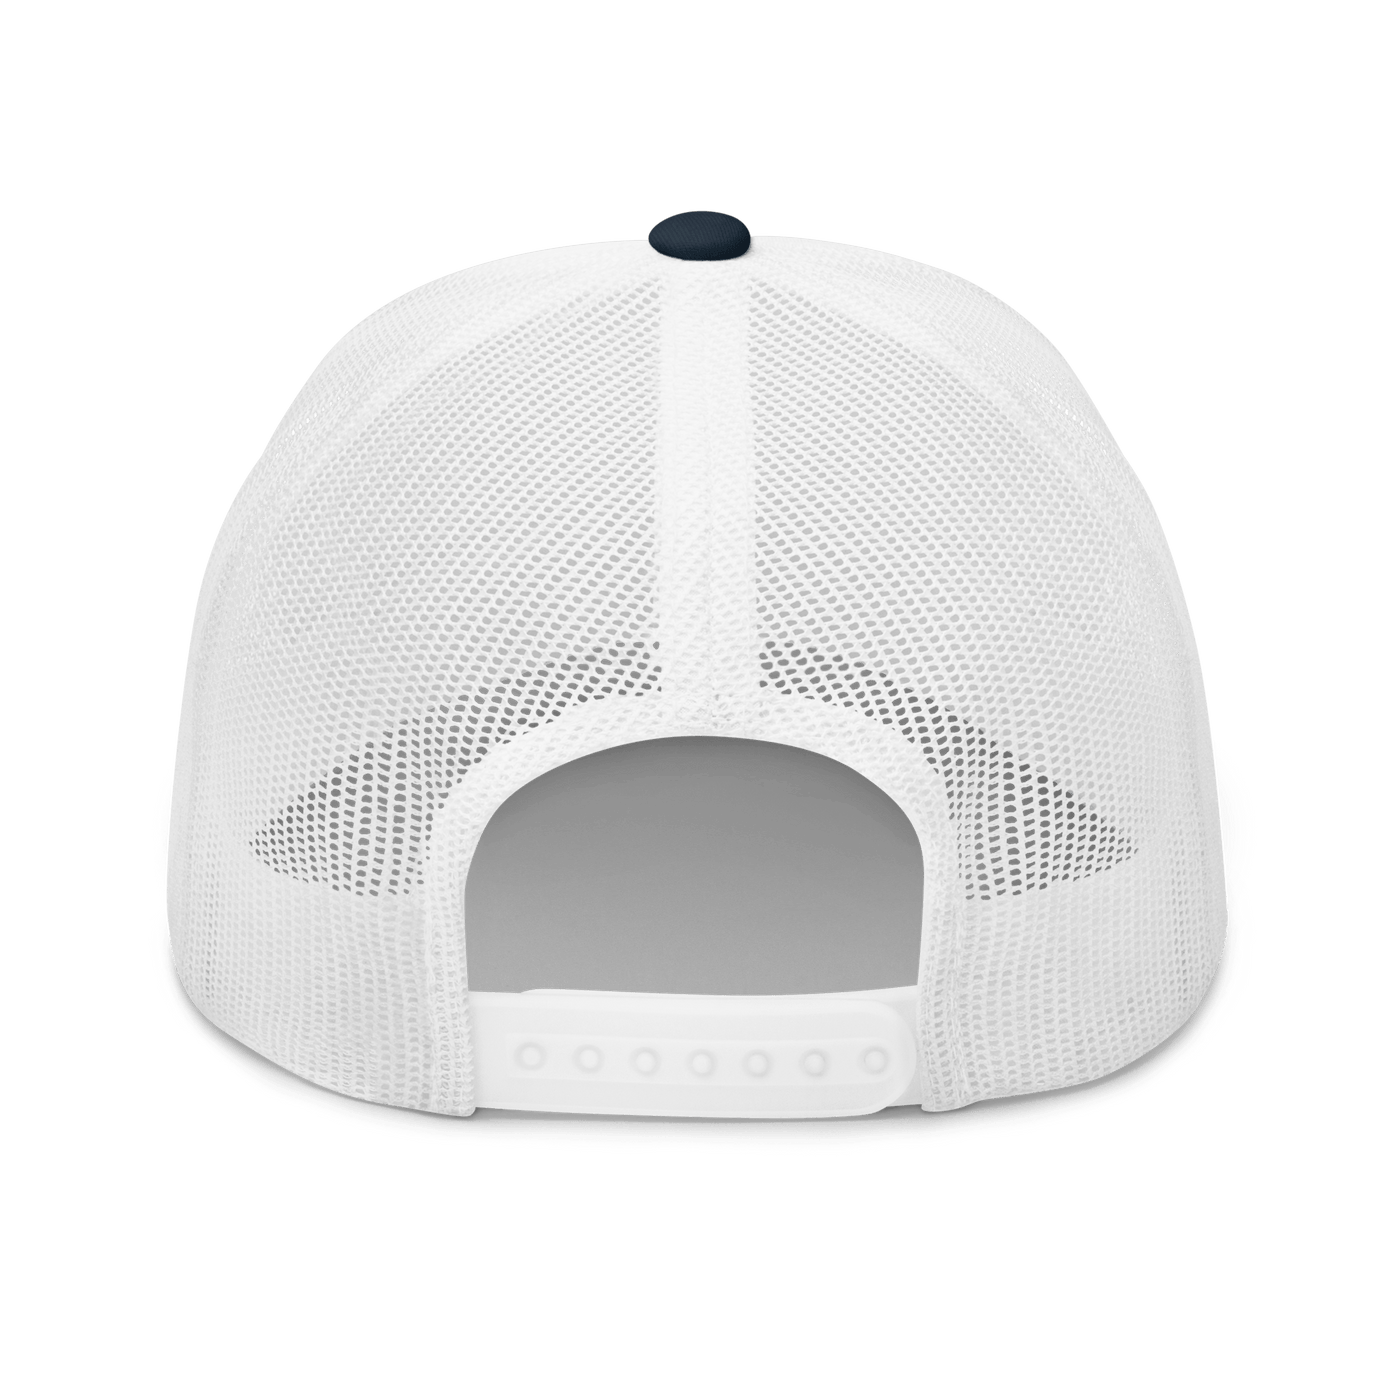 Fish & Chips Trucker Cap - Navy/ White - - Just Another Cap Store